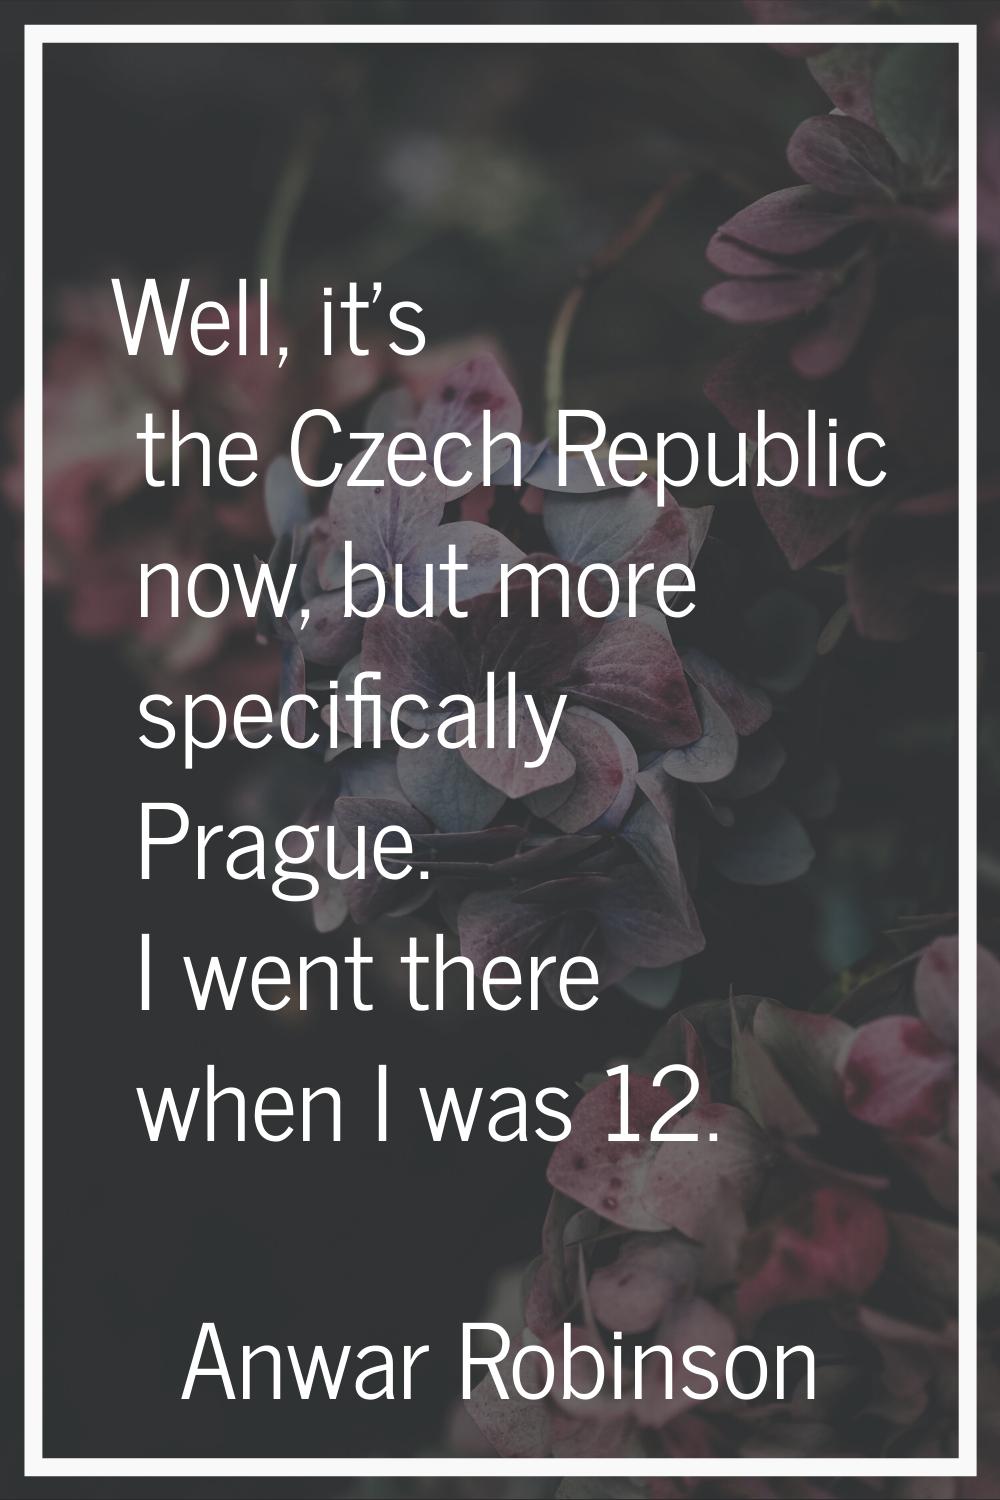 Well, it's the Czech Republic now, but more specifically Prague. I went there when I was 12.